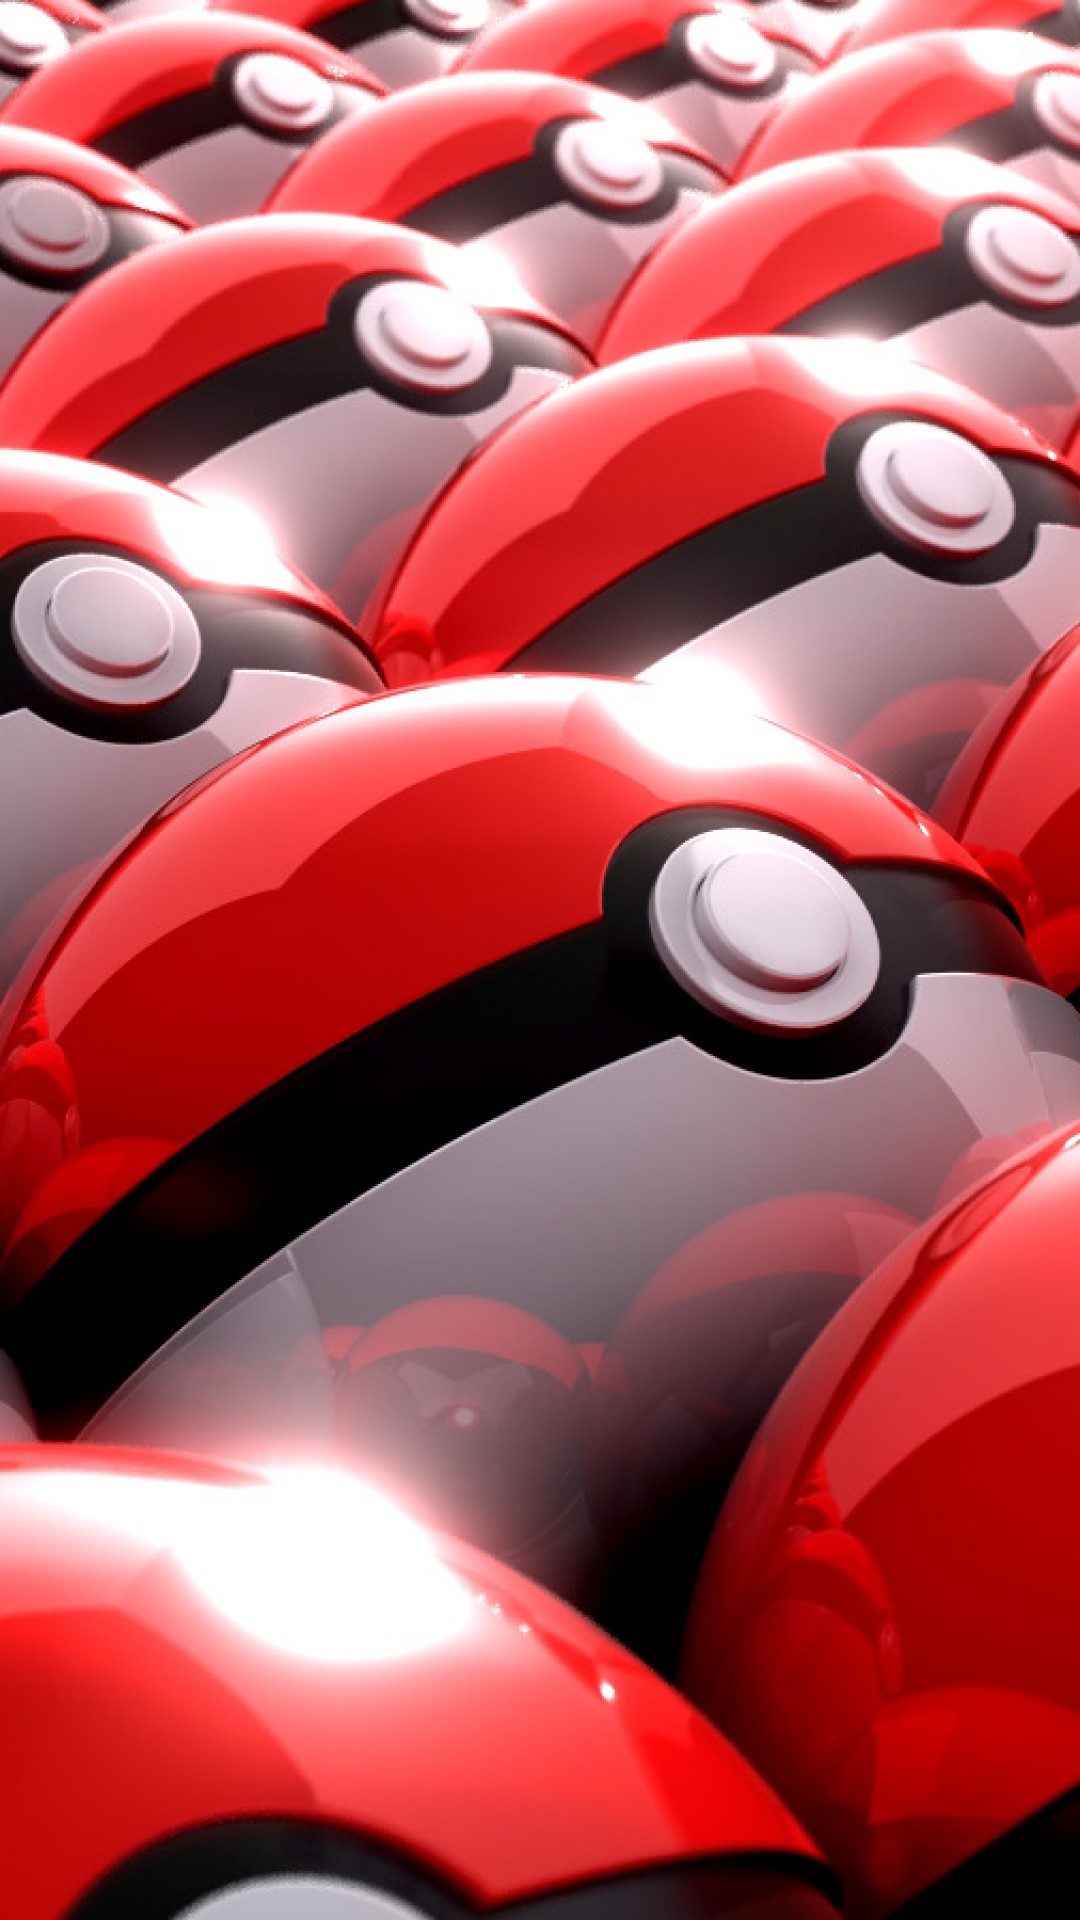 HD Pokemon iPhone Wallpapers (80+ images)1080 x 1920